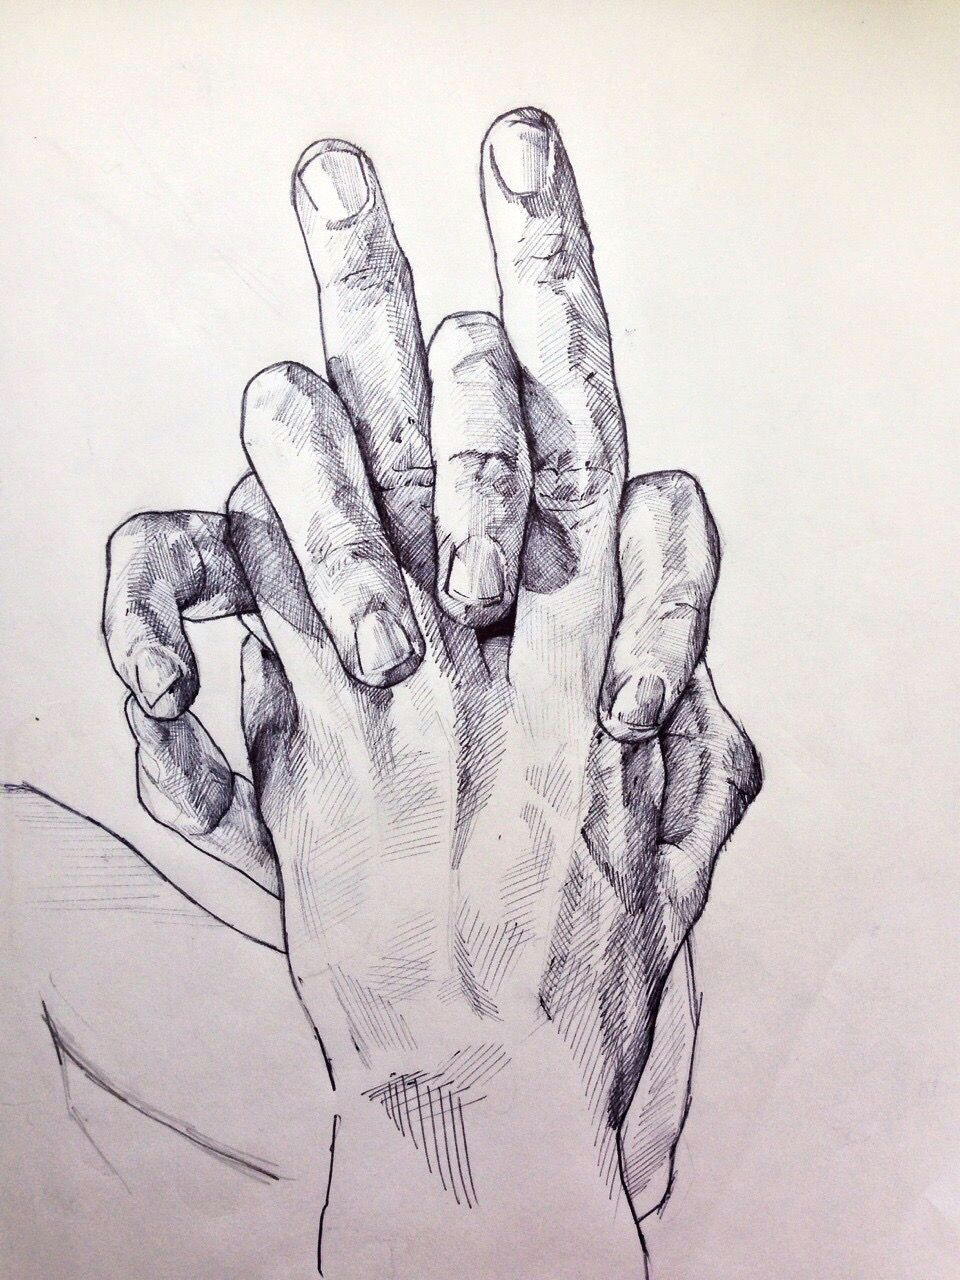 Drawing Of Joining Hands for Prayer Pin by Laia Alonso Gil On Uau Draws Pinterest Imagination and